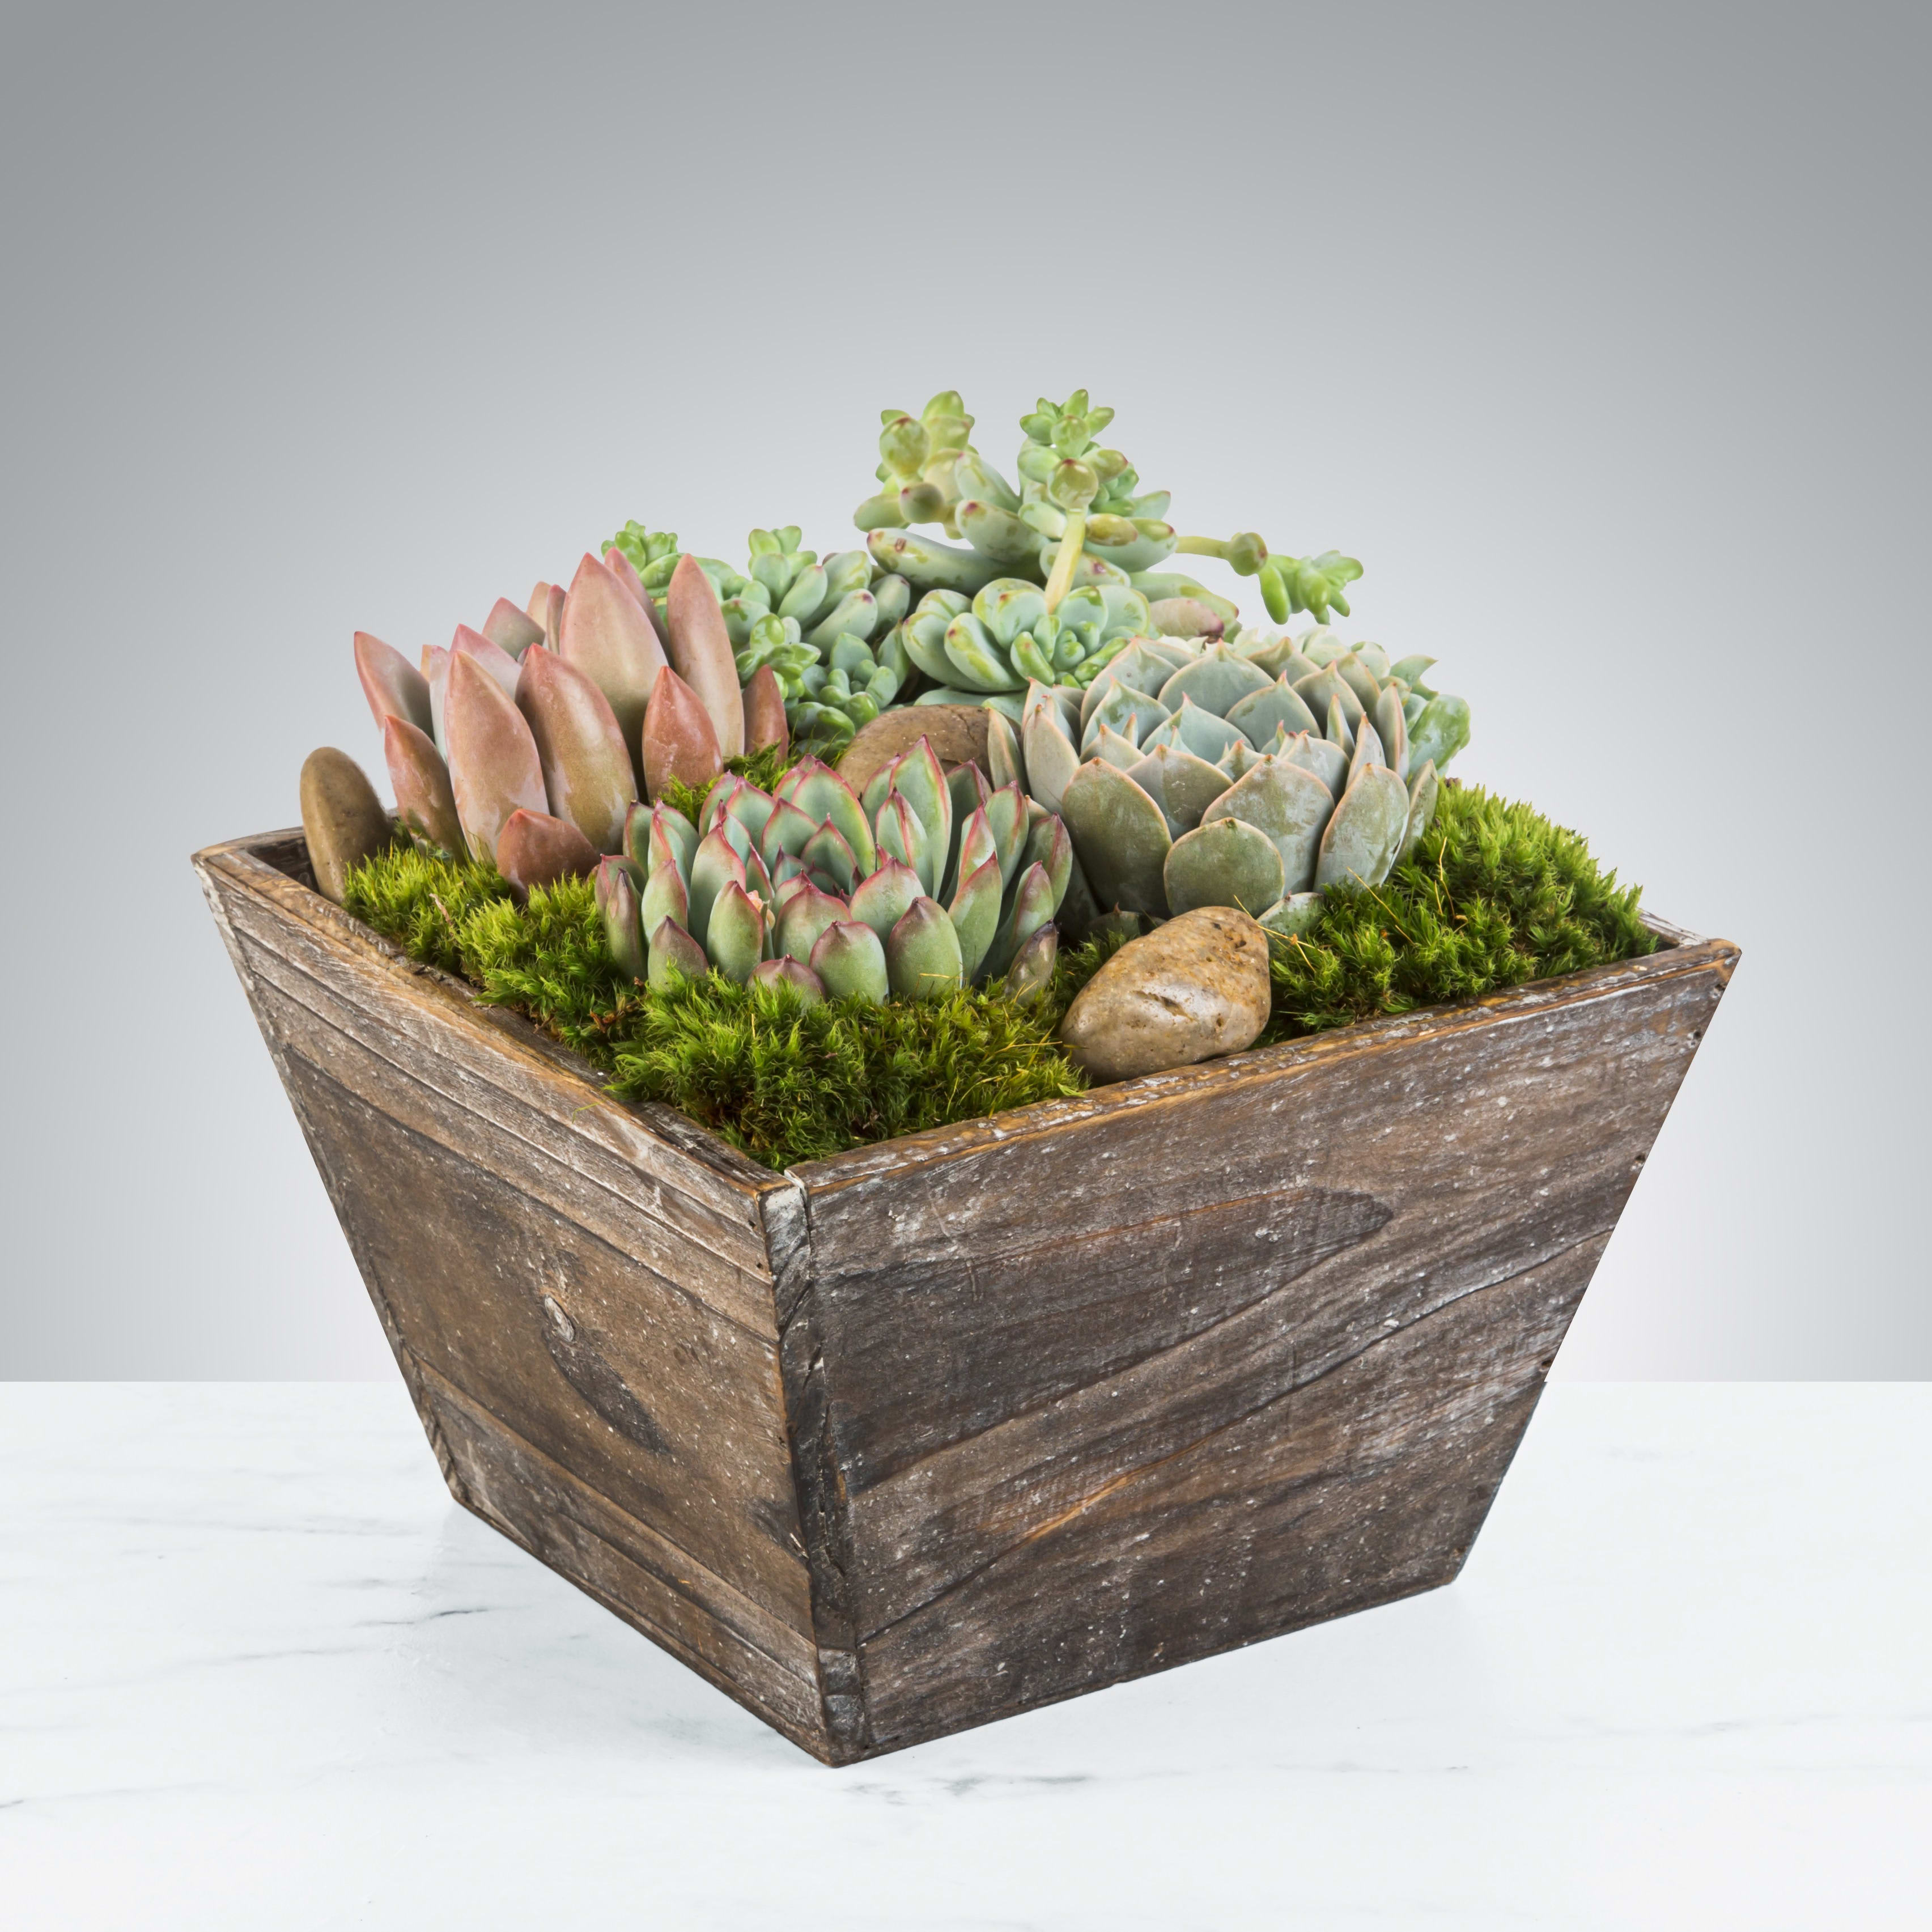 Succulent Box by BloomNation™ - The perfect desk or table accessory, this succulent box features four 4 inch succulents and an assortment of decorative rocks. Perfect for birthdays, Father's Day or sending post promotion or job hire. APPROXIMATE DIMENSIONS: 8&quot; W x 7&quot; H